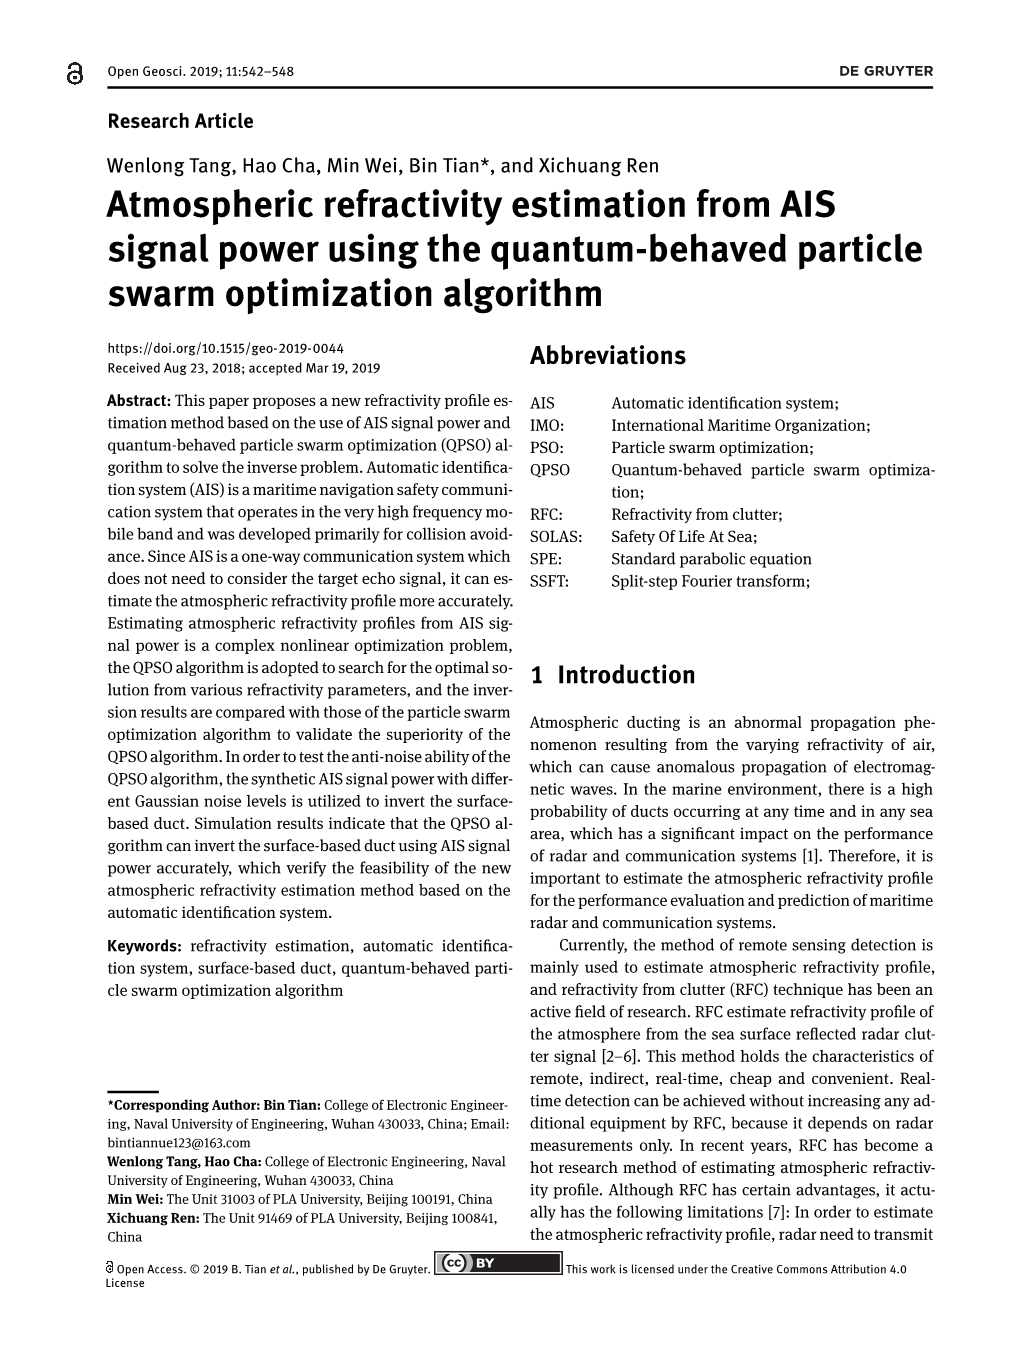 Atmospheric Refractivity Estimation from AIS Signal Power Using The